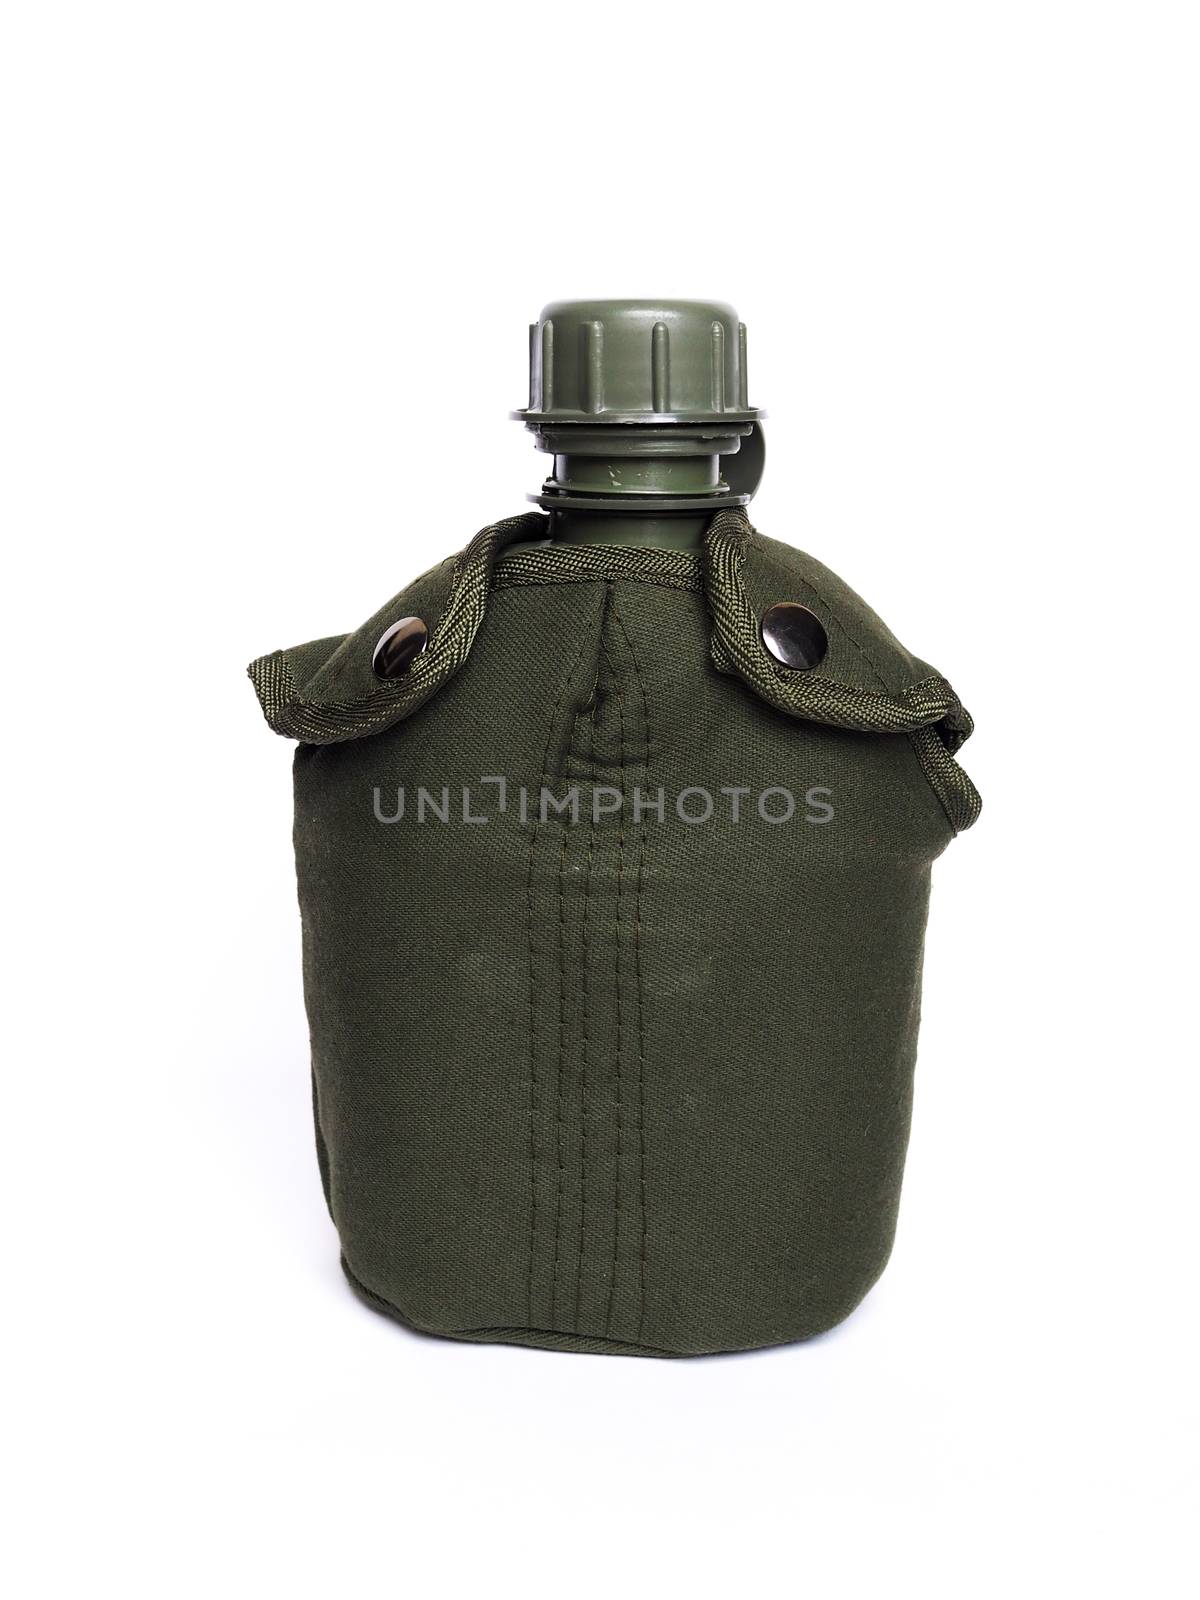 Green military water bottle for hiking, camping. by kittima05